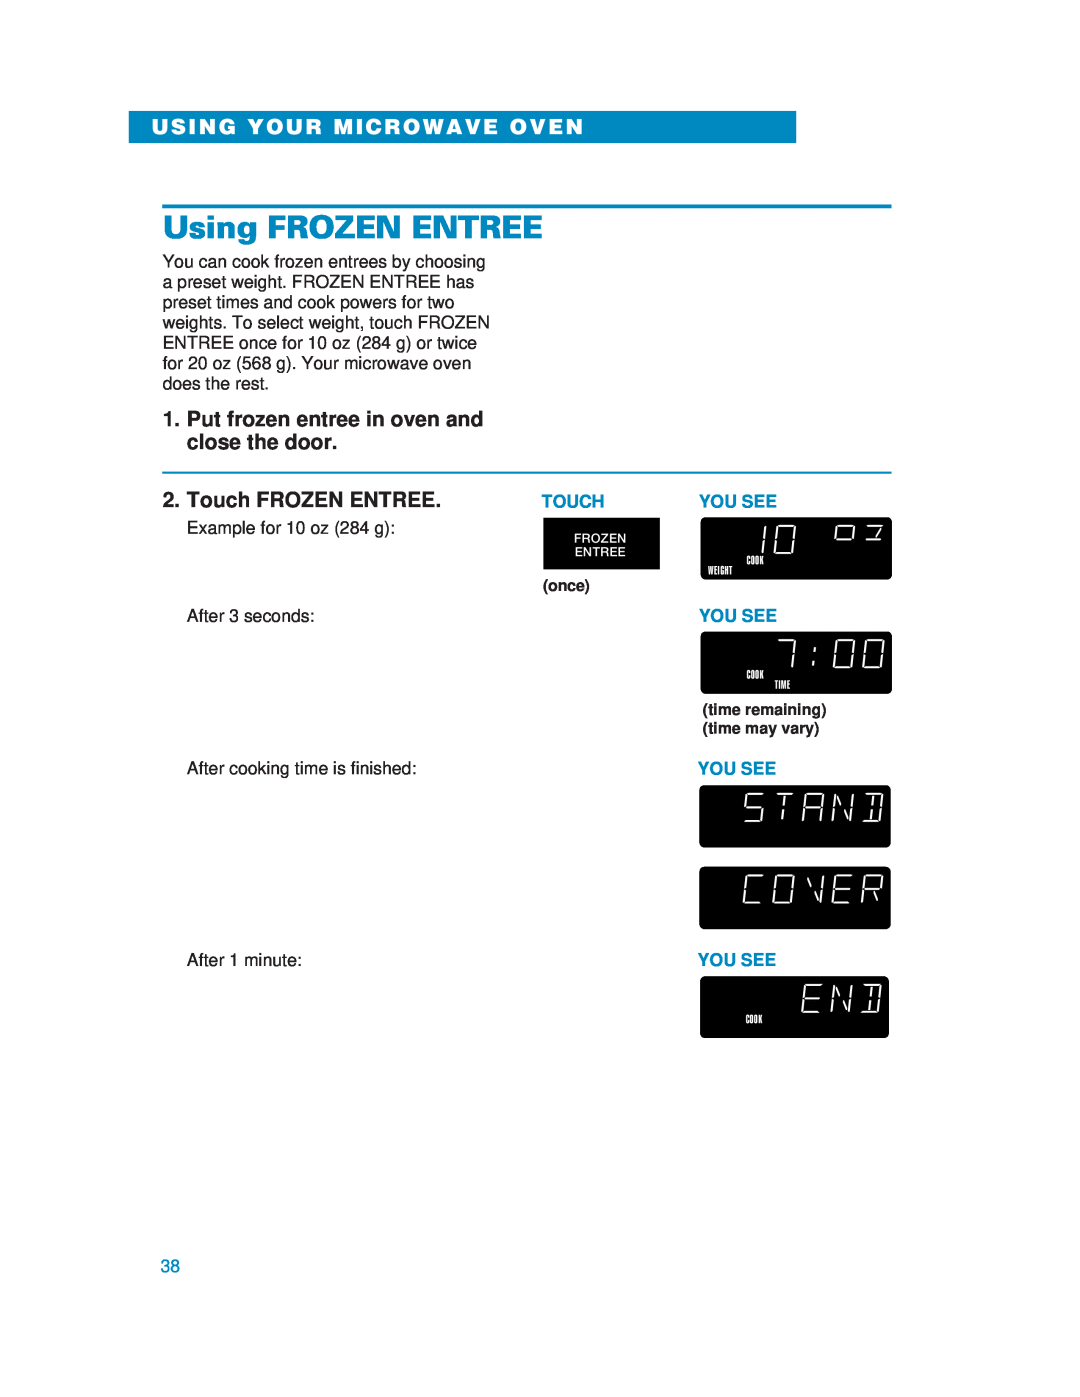 Whirlpool YMH6130XE warranty Using FROZEN ENTREE, Put frozen entree in oven and close the door, Touch FROZEN ENTREE 